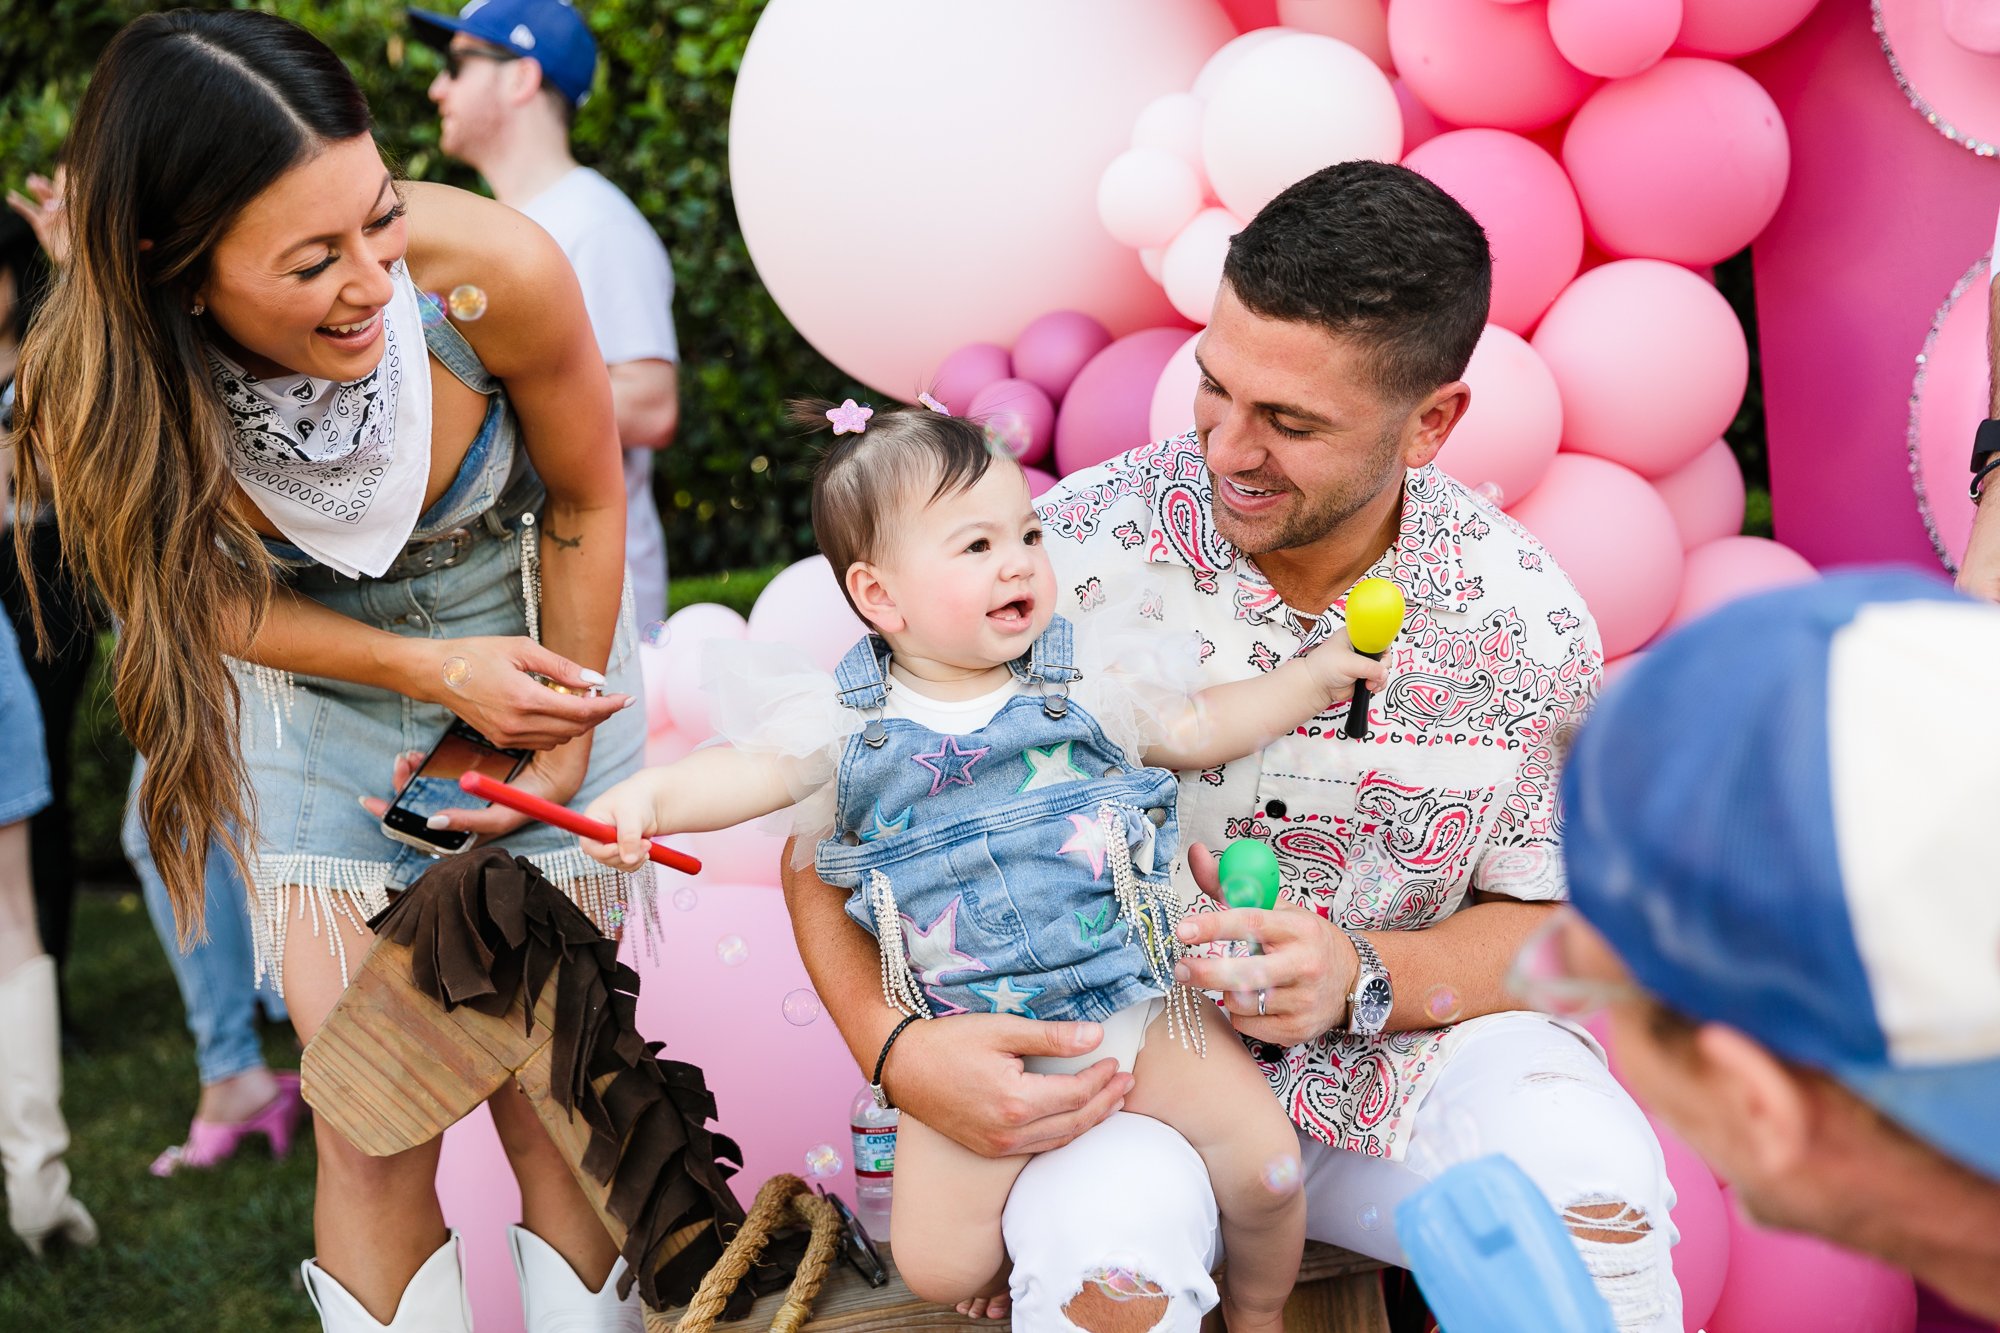 Los_Angeles_Party_Photographer_Luxury_Event_First_Birthday_Baby_Sherwood_Beverly_Hills_Cowboy_Disco_Theme_Girl_Child_Family_Photography-1352.jpg